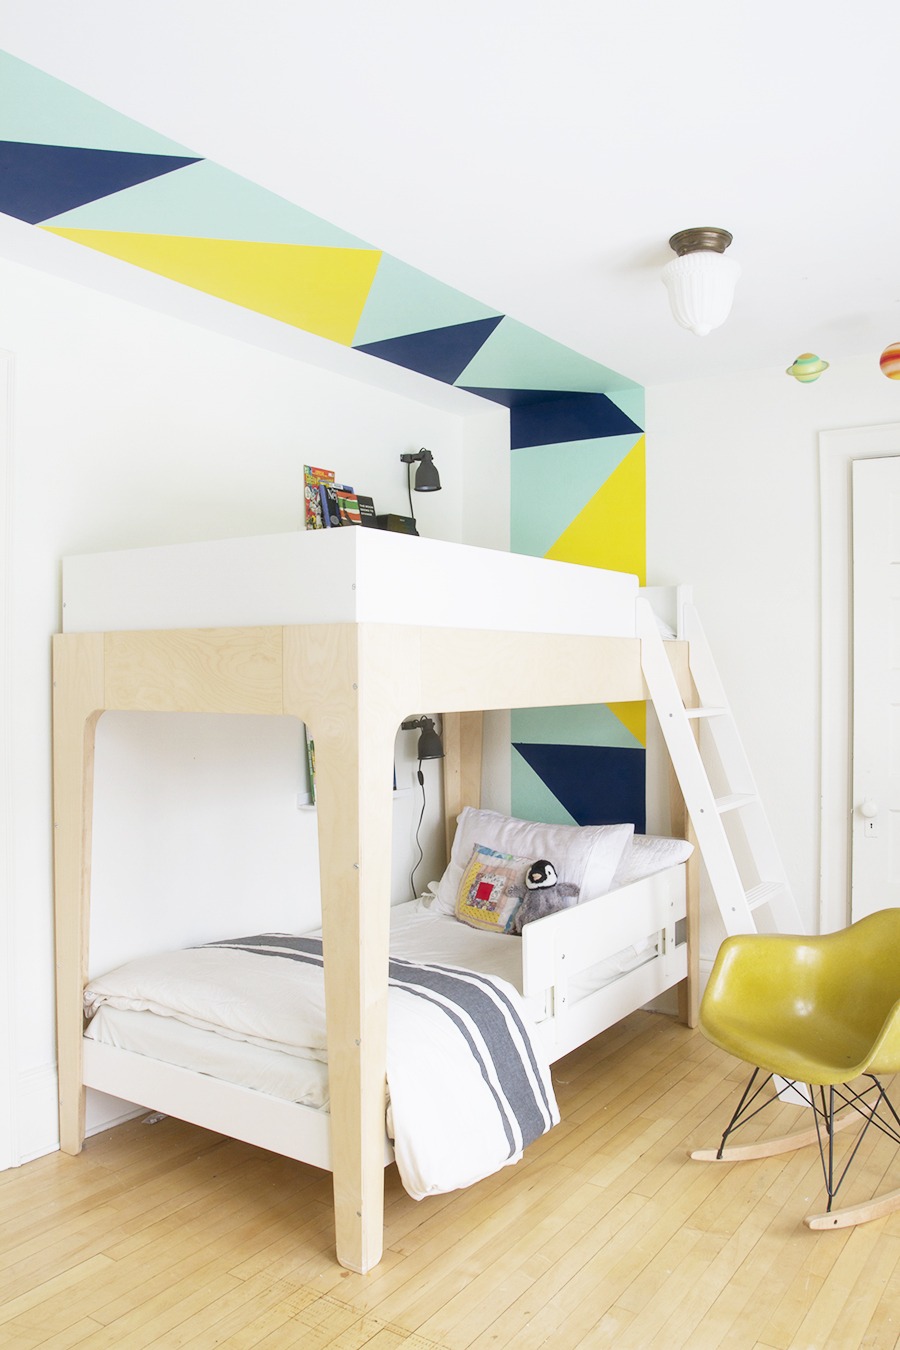 Geometric Color Blocking in the Boys Room